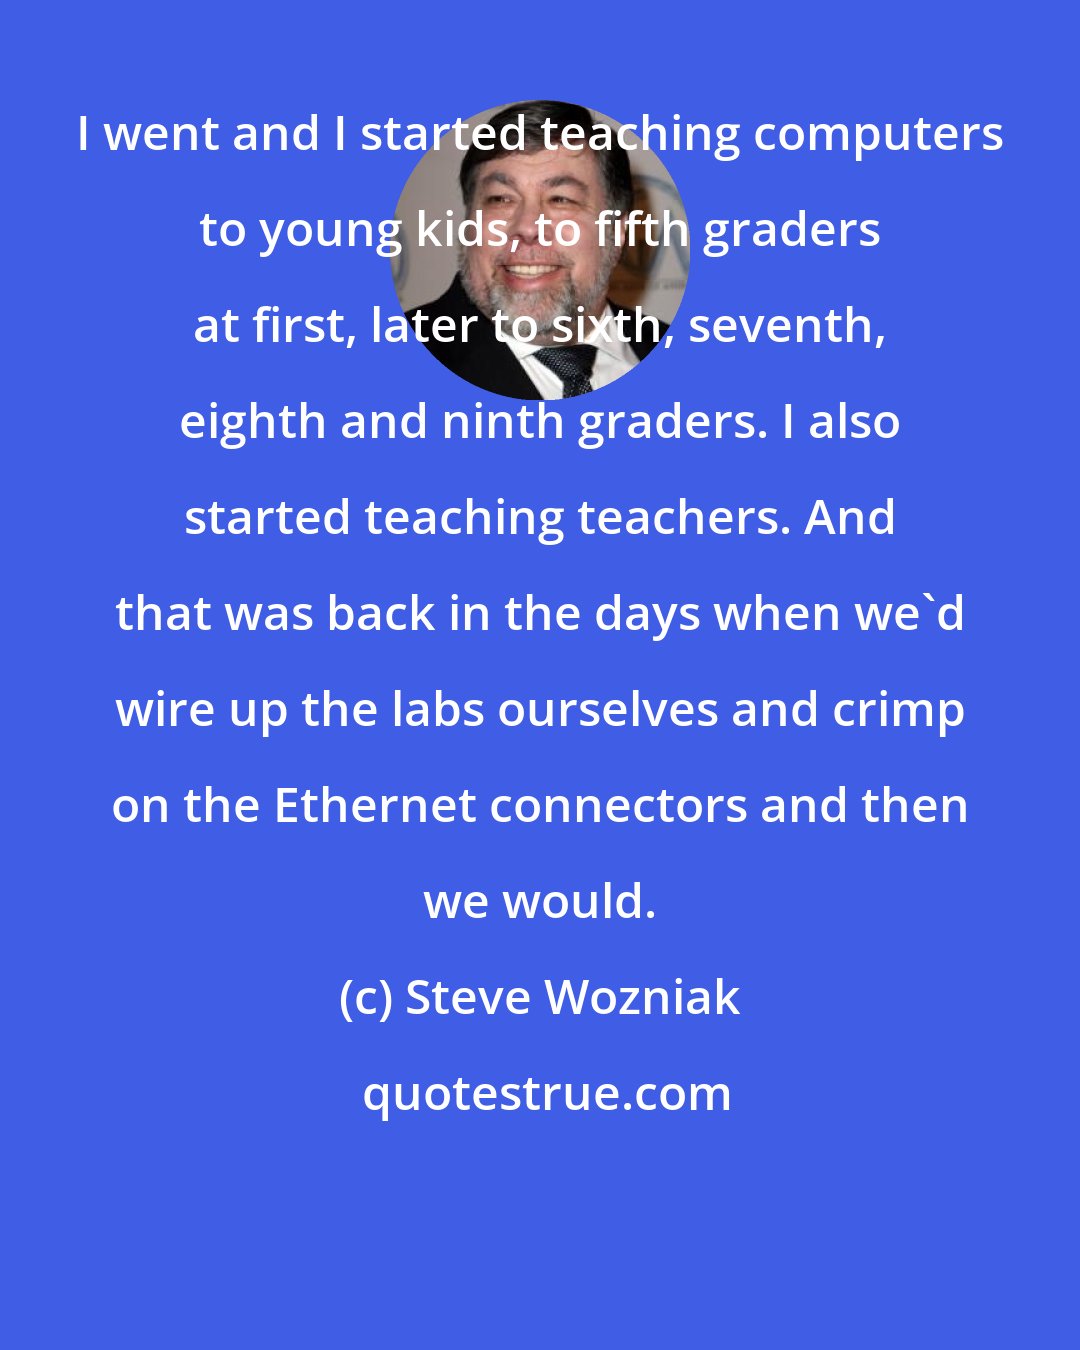 Steve Wozniak: I went and I started teaching computers to young kids, to fifth graders at first, later to sixth, seventh, eighth and ninth graders. I also started teaching teachers. And that was back in the days when we'd wire up the labs ourselves and crimp on the Ethernet connectors and then we would.